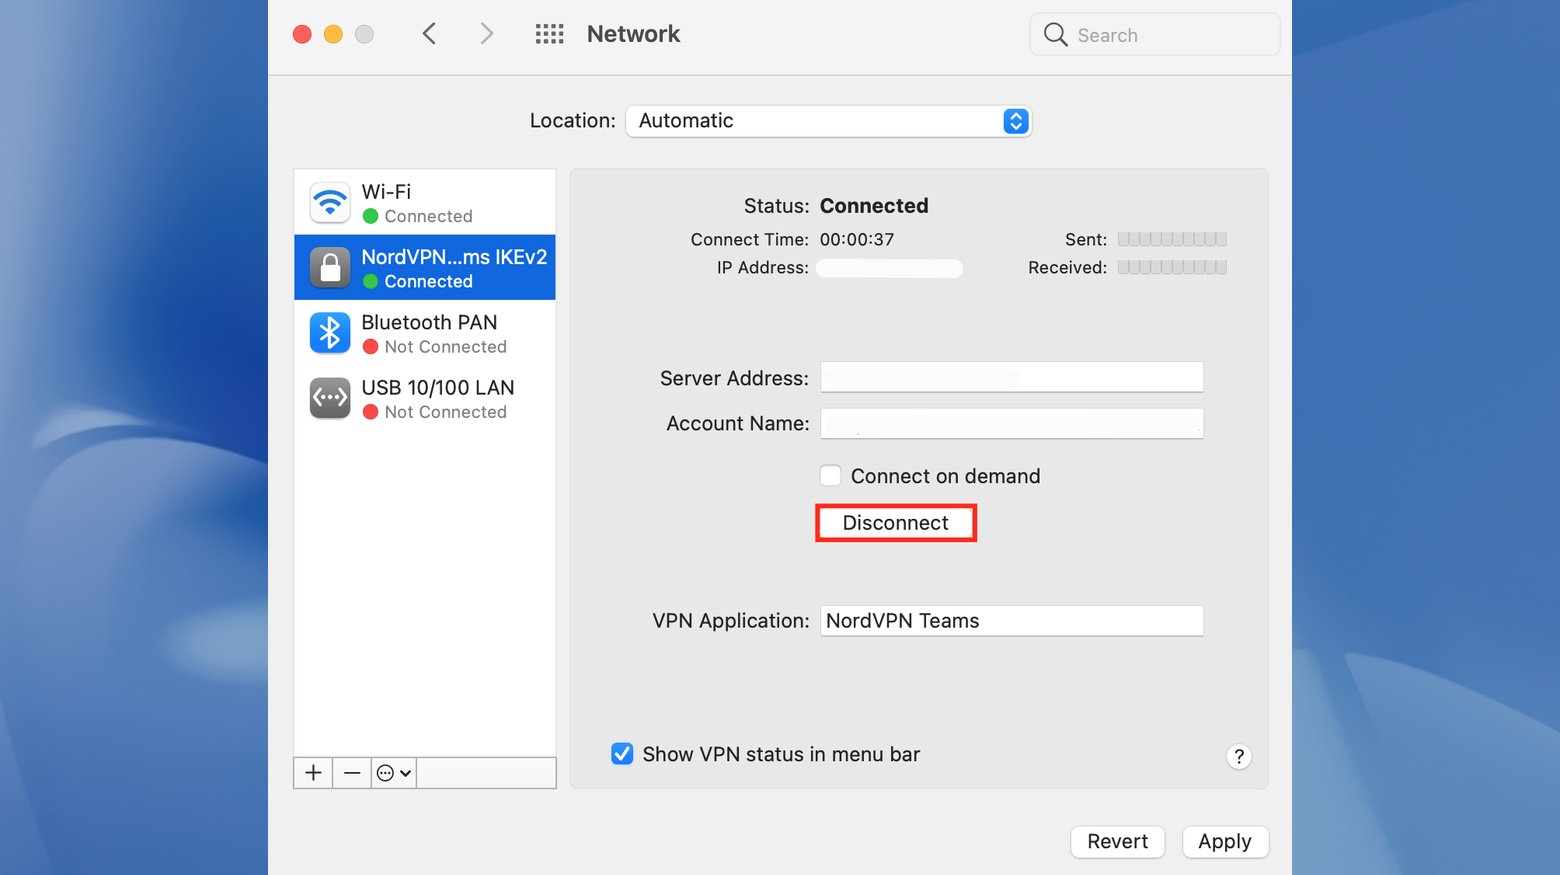 Mac network settings with VPN and disconnect highlighted